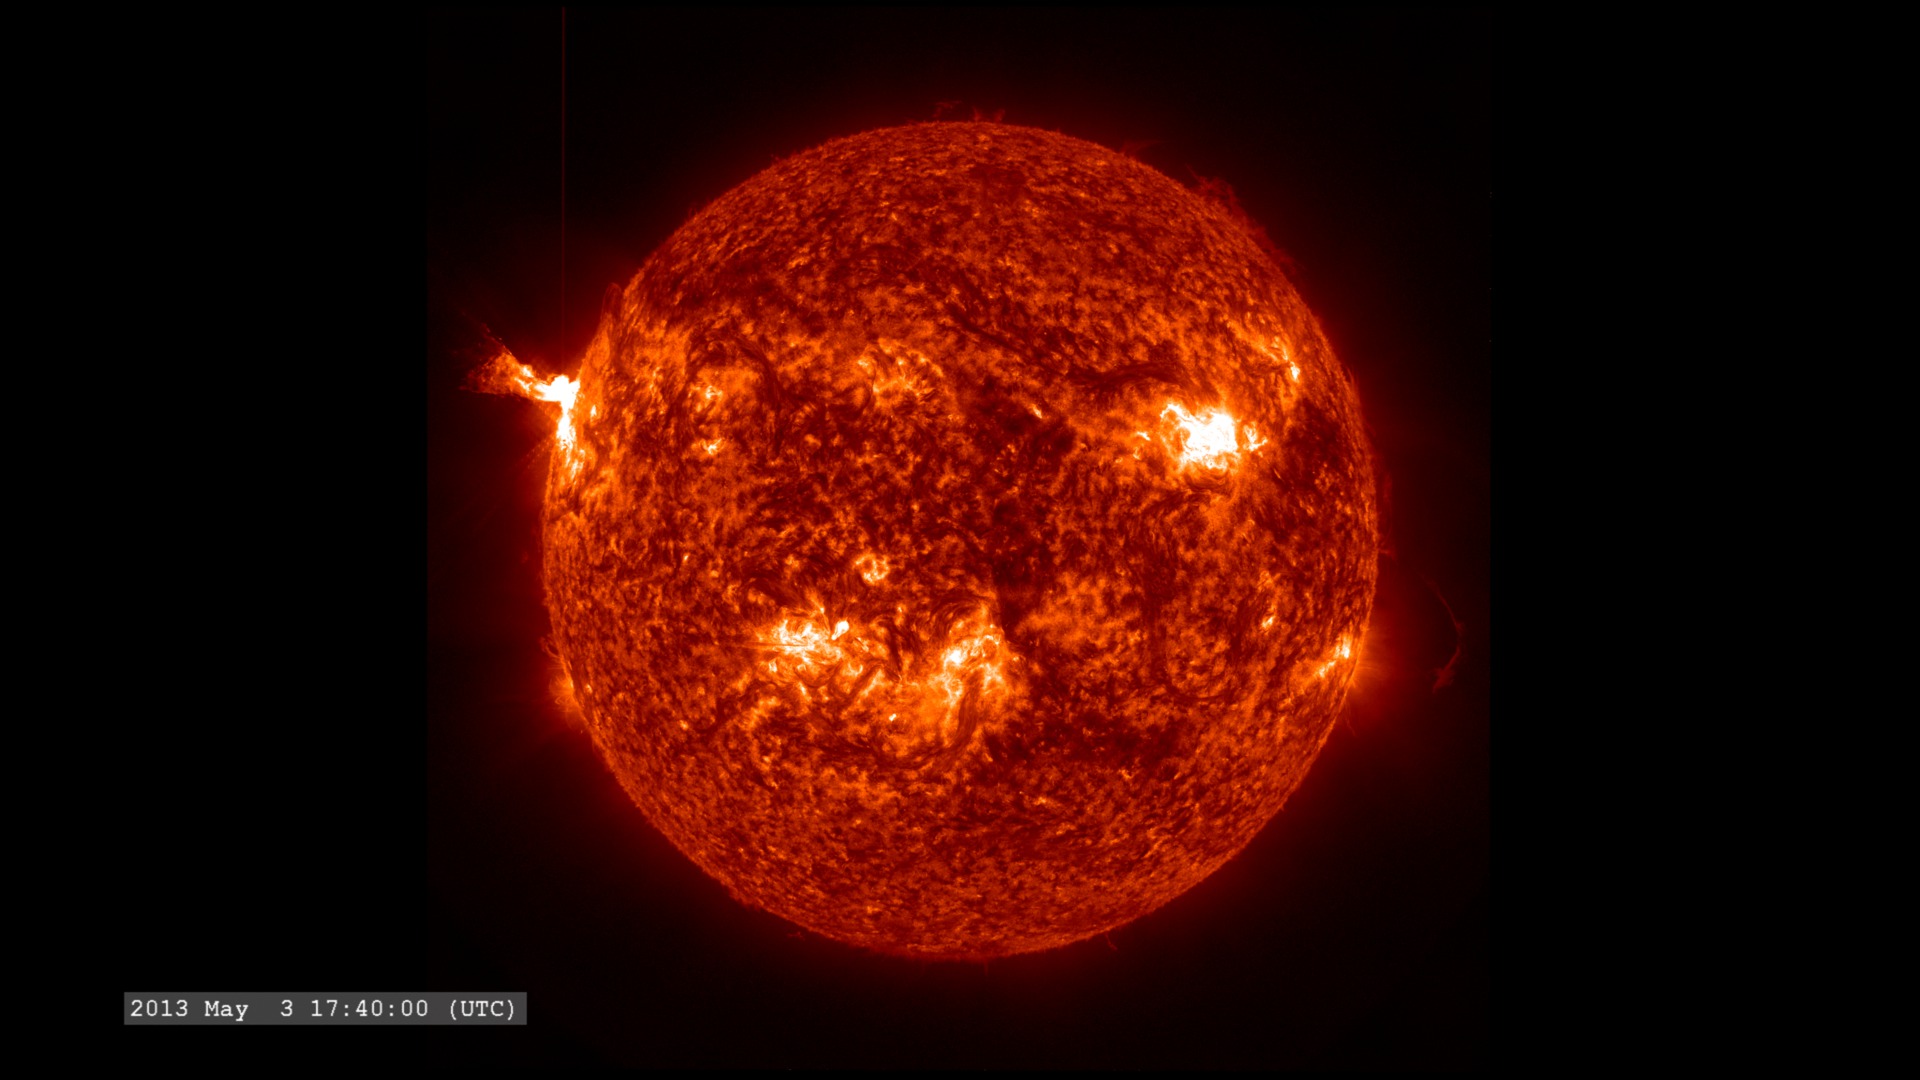 In the 30.4nm wavelength of the helium ion, we can see both the flare, as well as some of the ejected solar material.